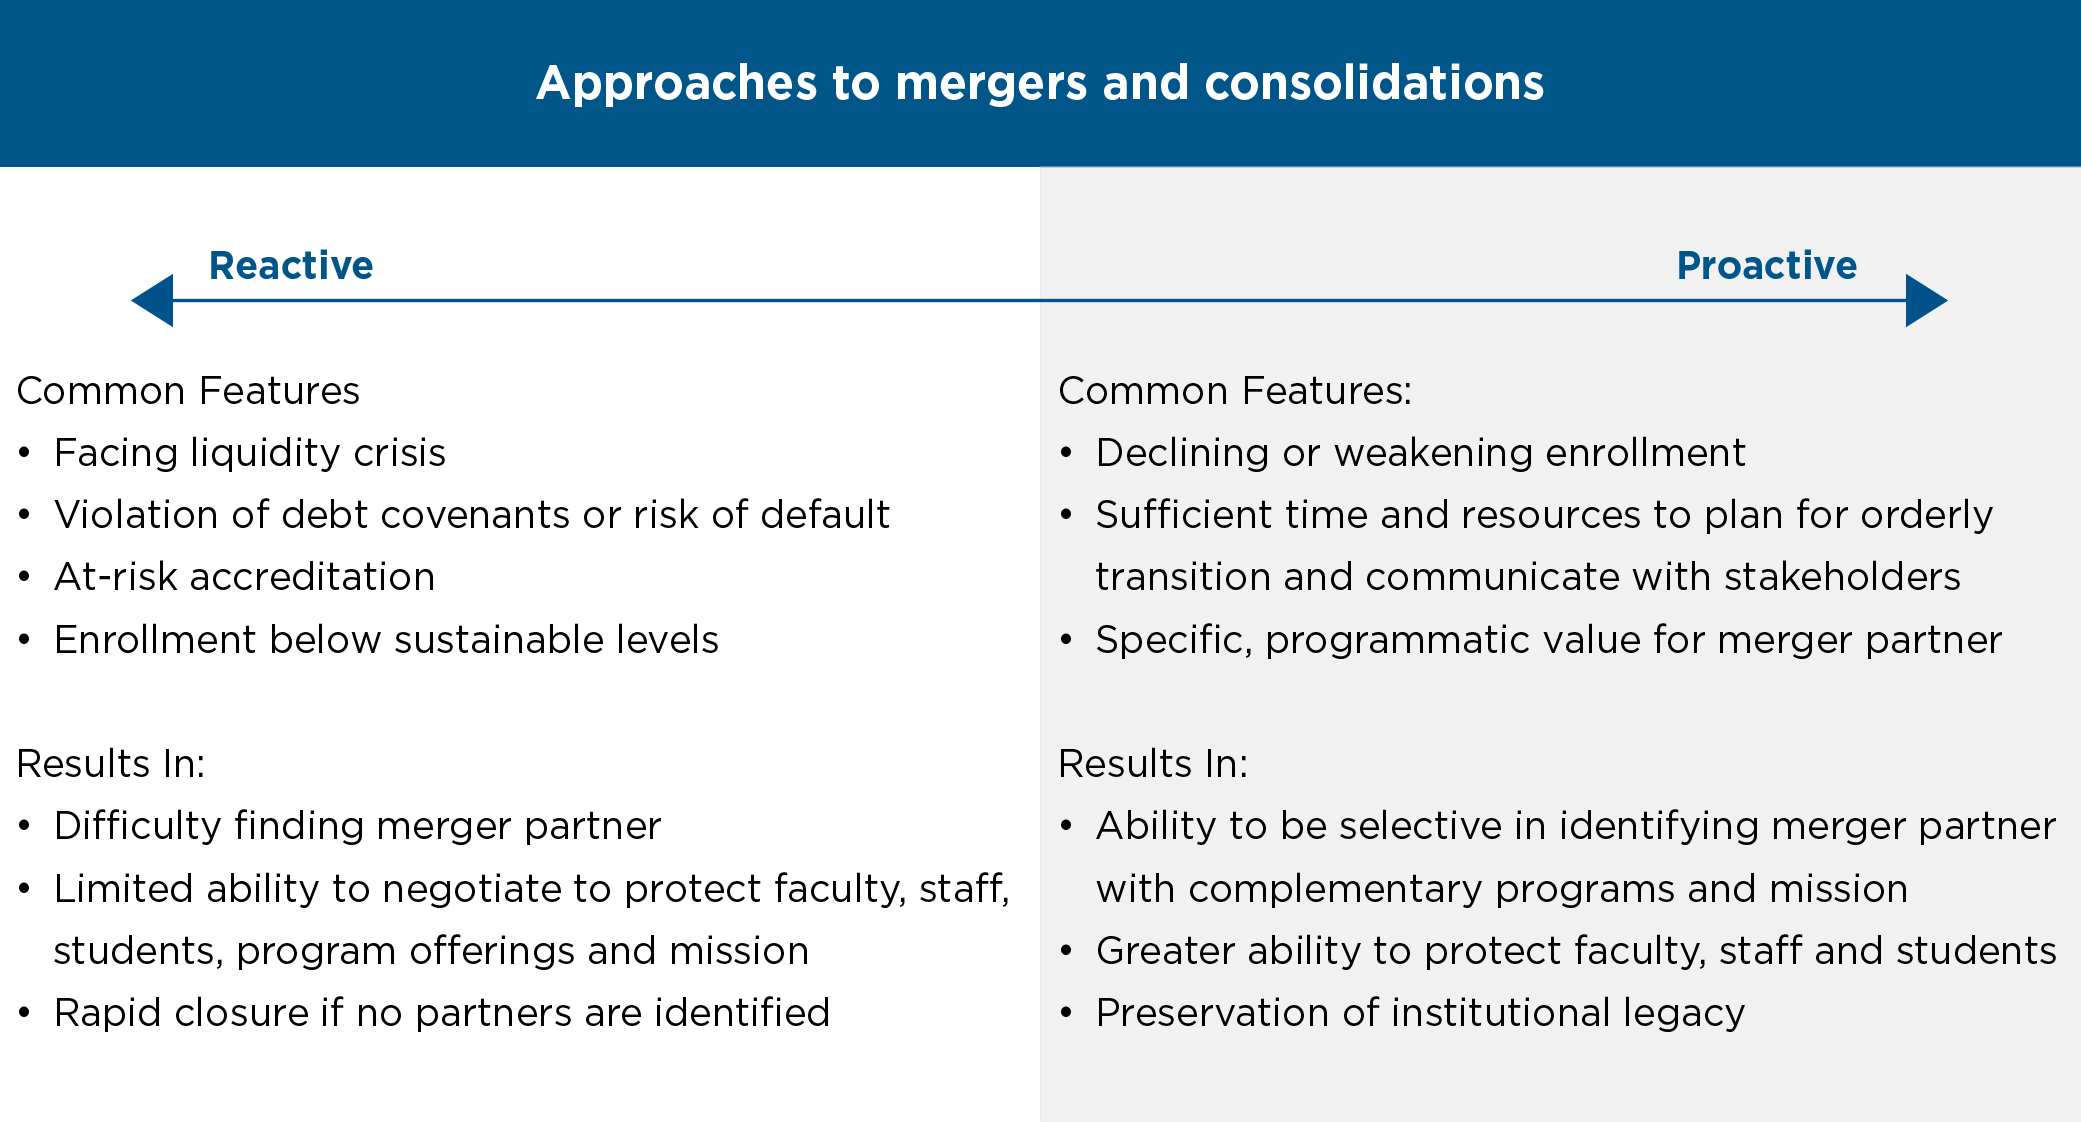 A table of approaches to mergers and consolidations, both reactive and proactive